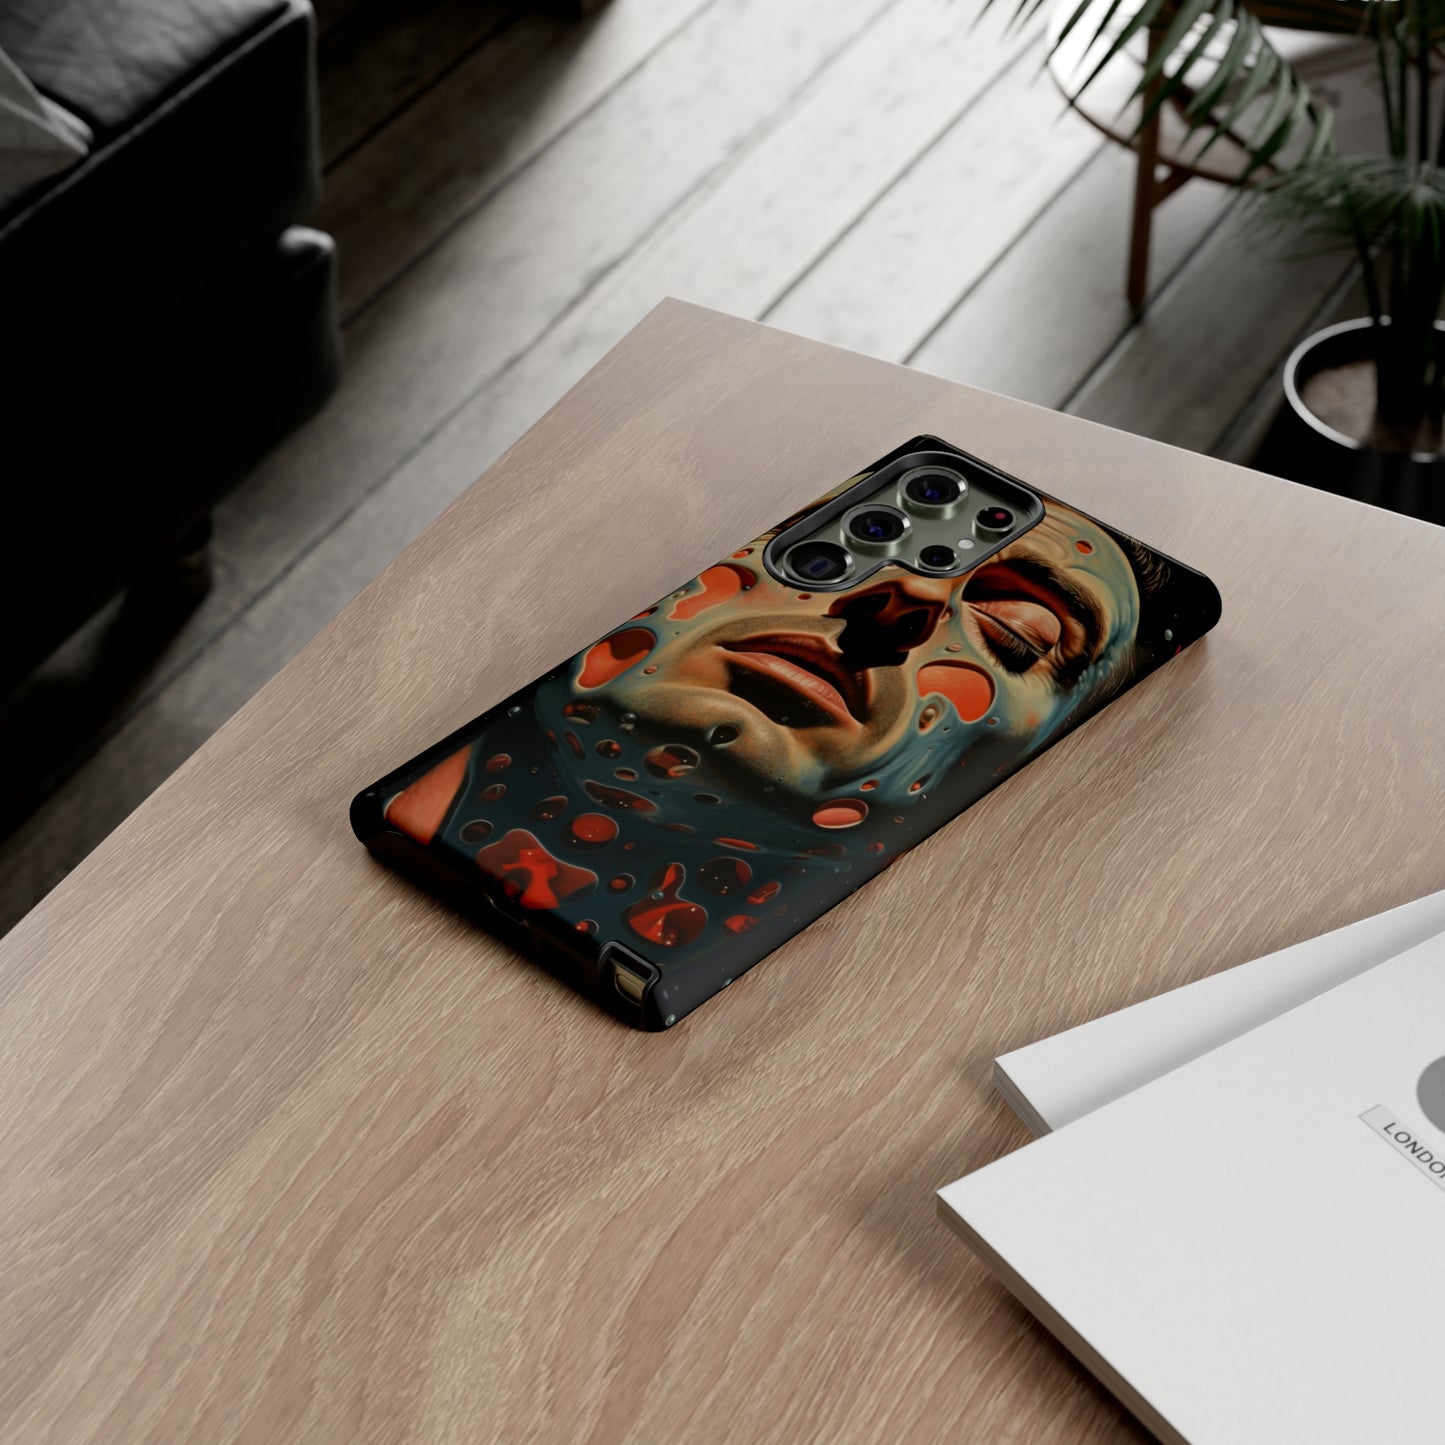 An image of a unique AI generated graphic surrealism design on a tough phone case